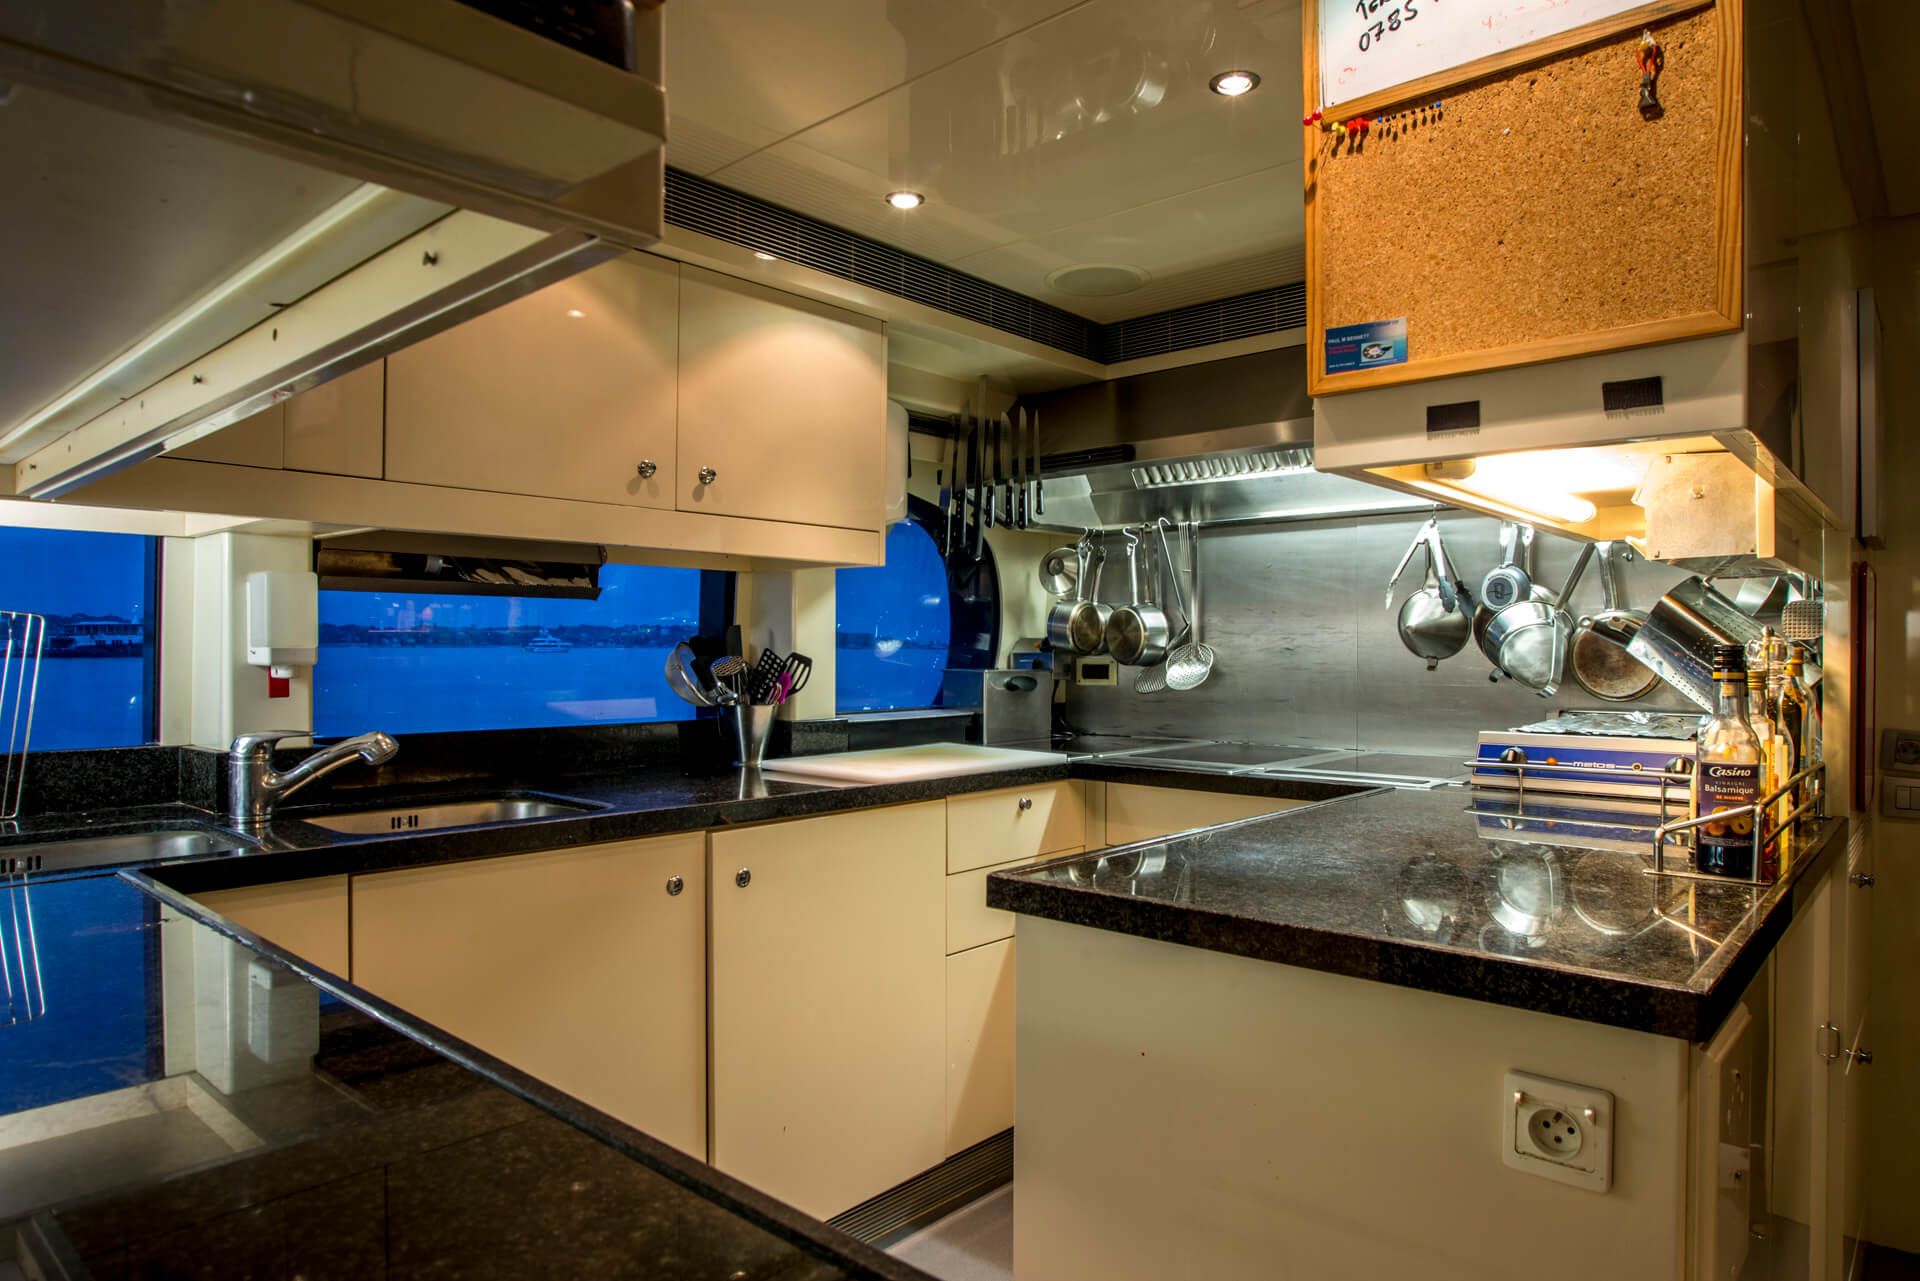 The galley on yacht SIROCCO